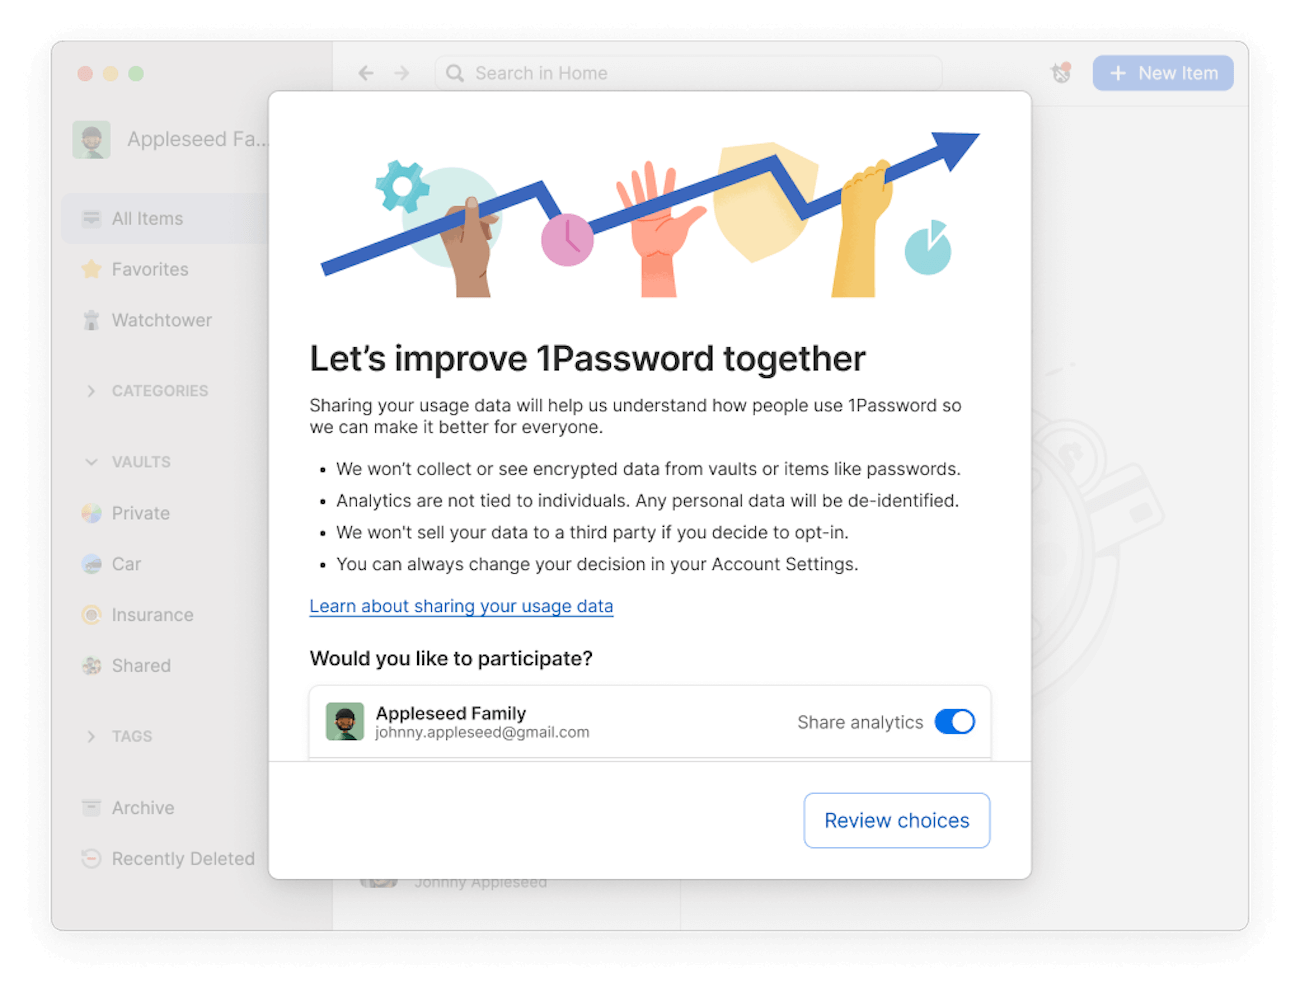 A screenshot showing the in-app message for 1Password's privacy-preserving telemetry system.